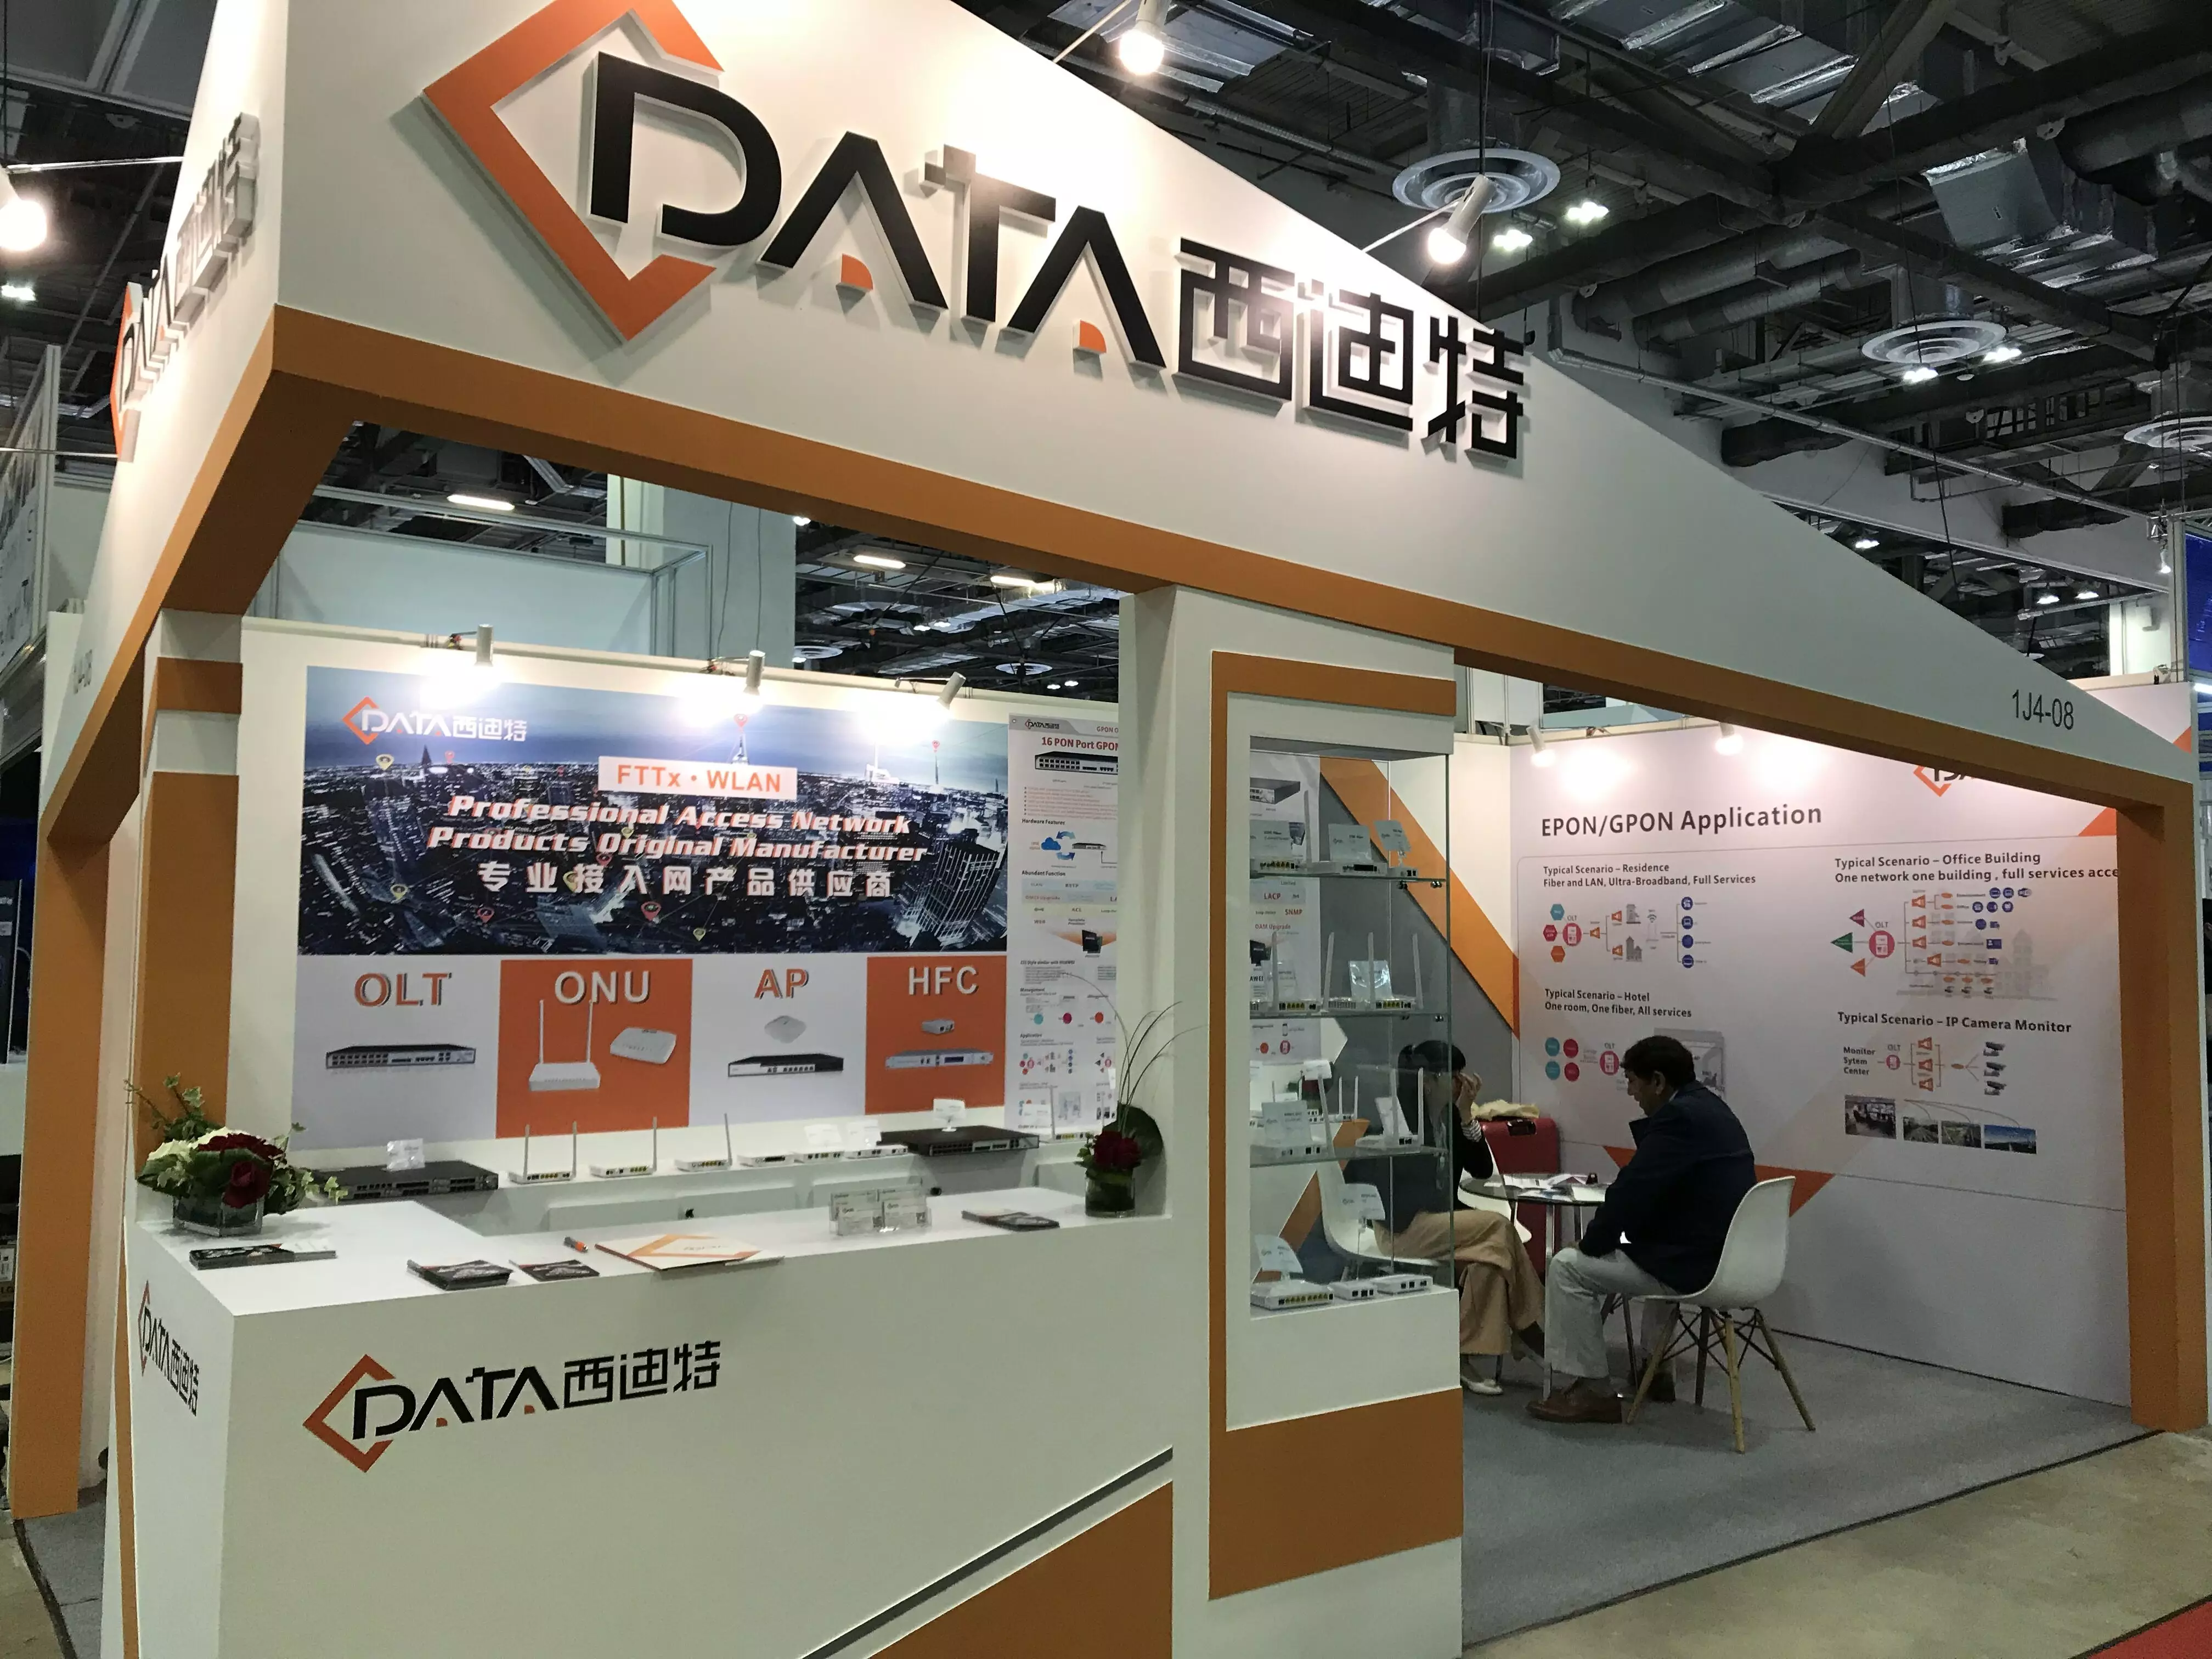 c data is making a wonderful appearance at communicaasia2018